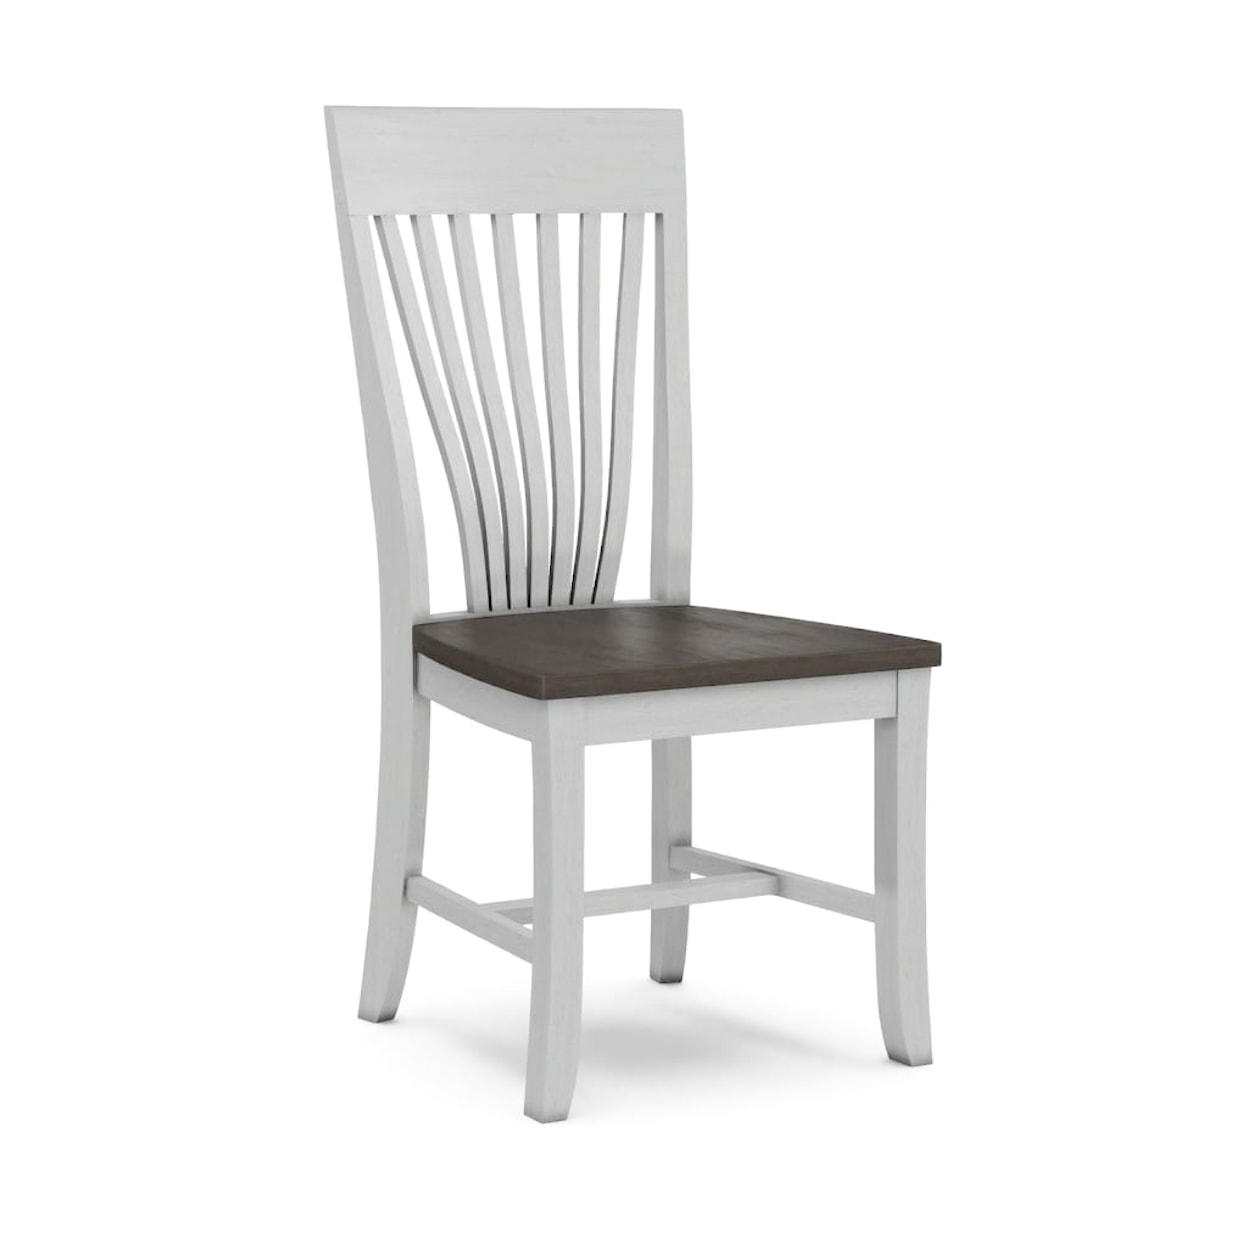 John Thomas Curated Collection Two-Tone Amanda Chair